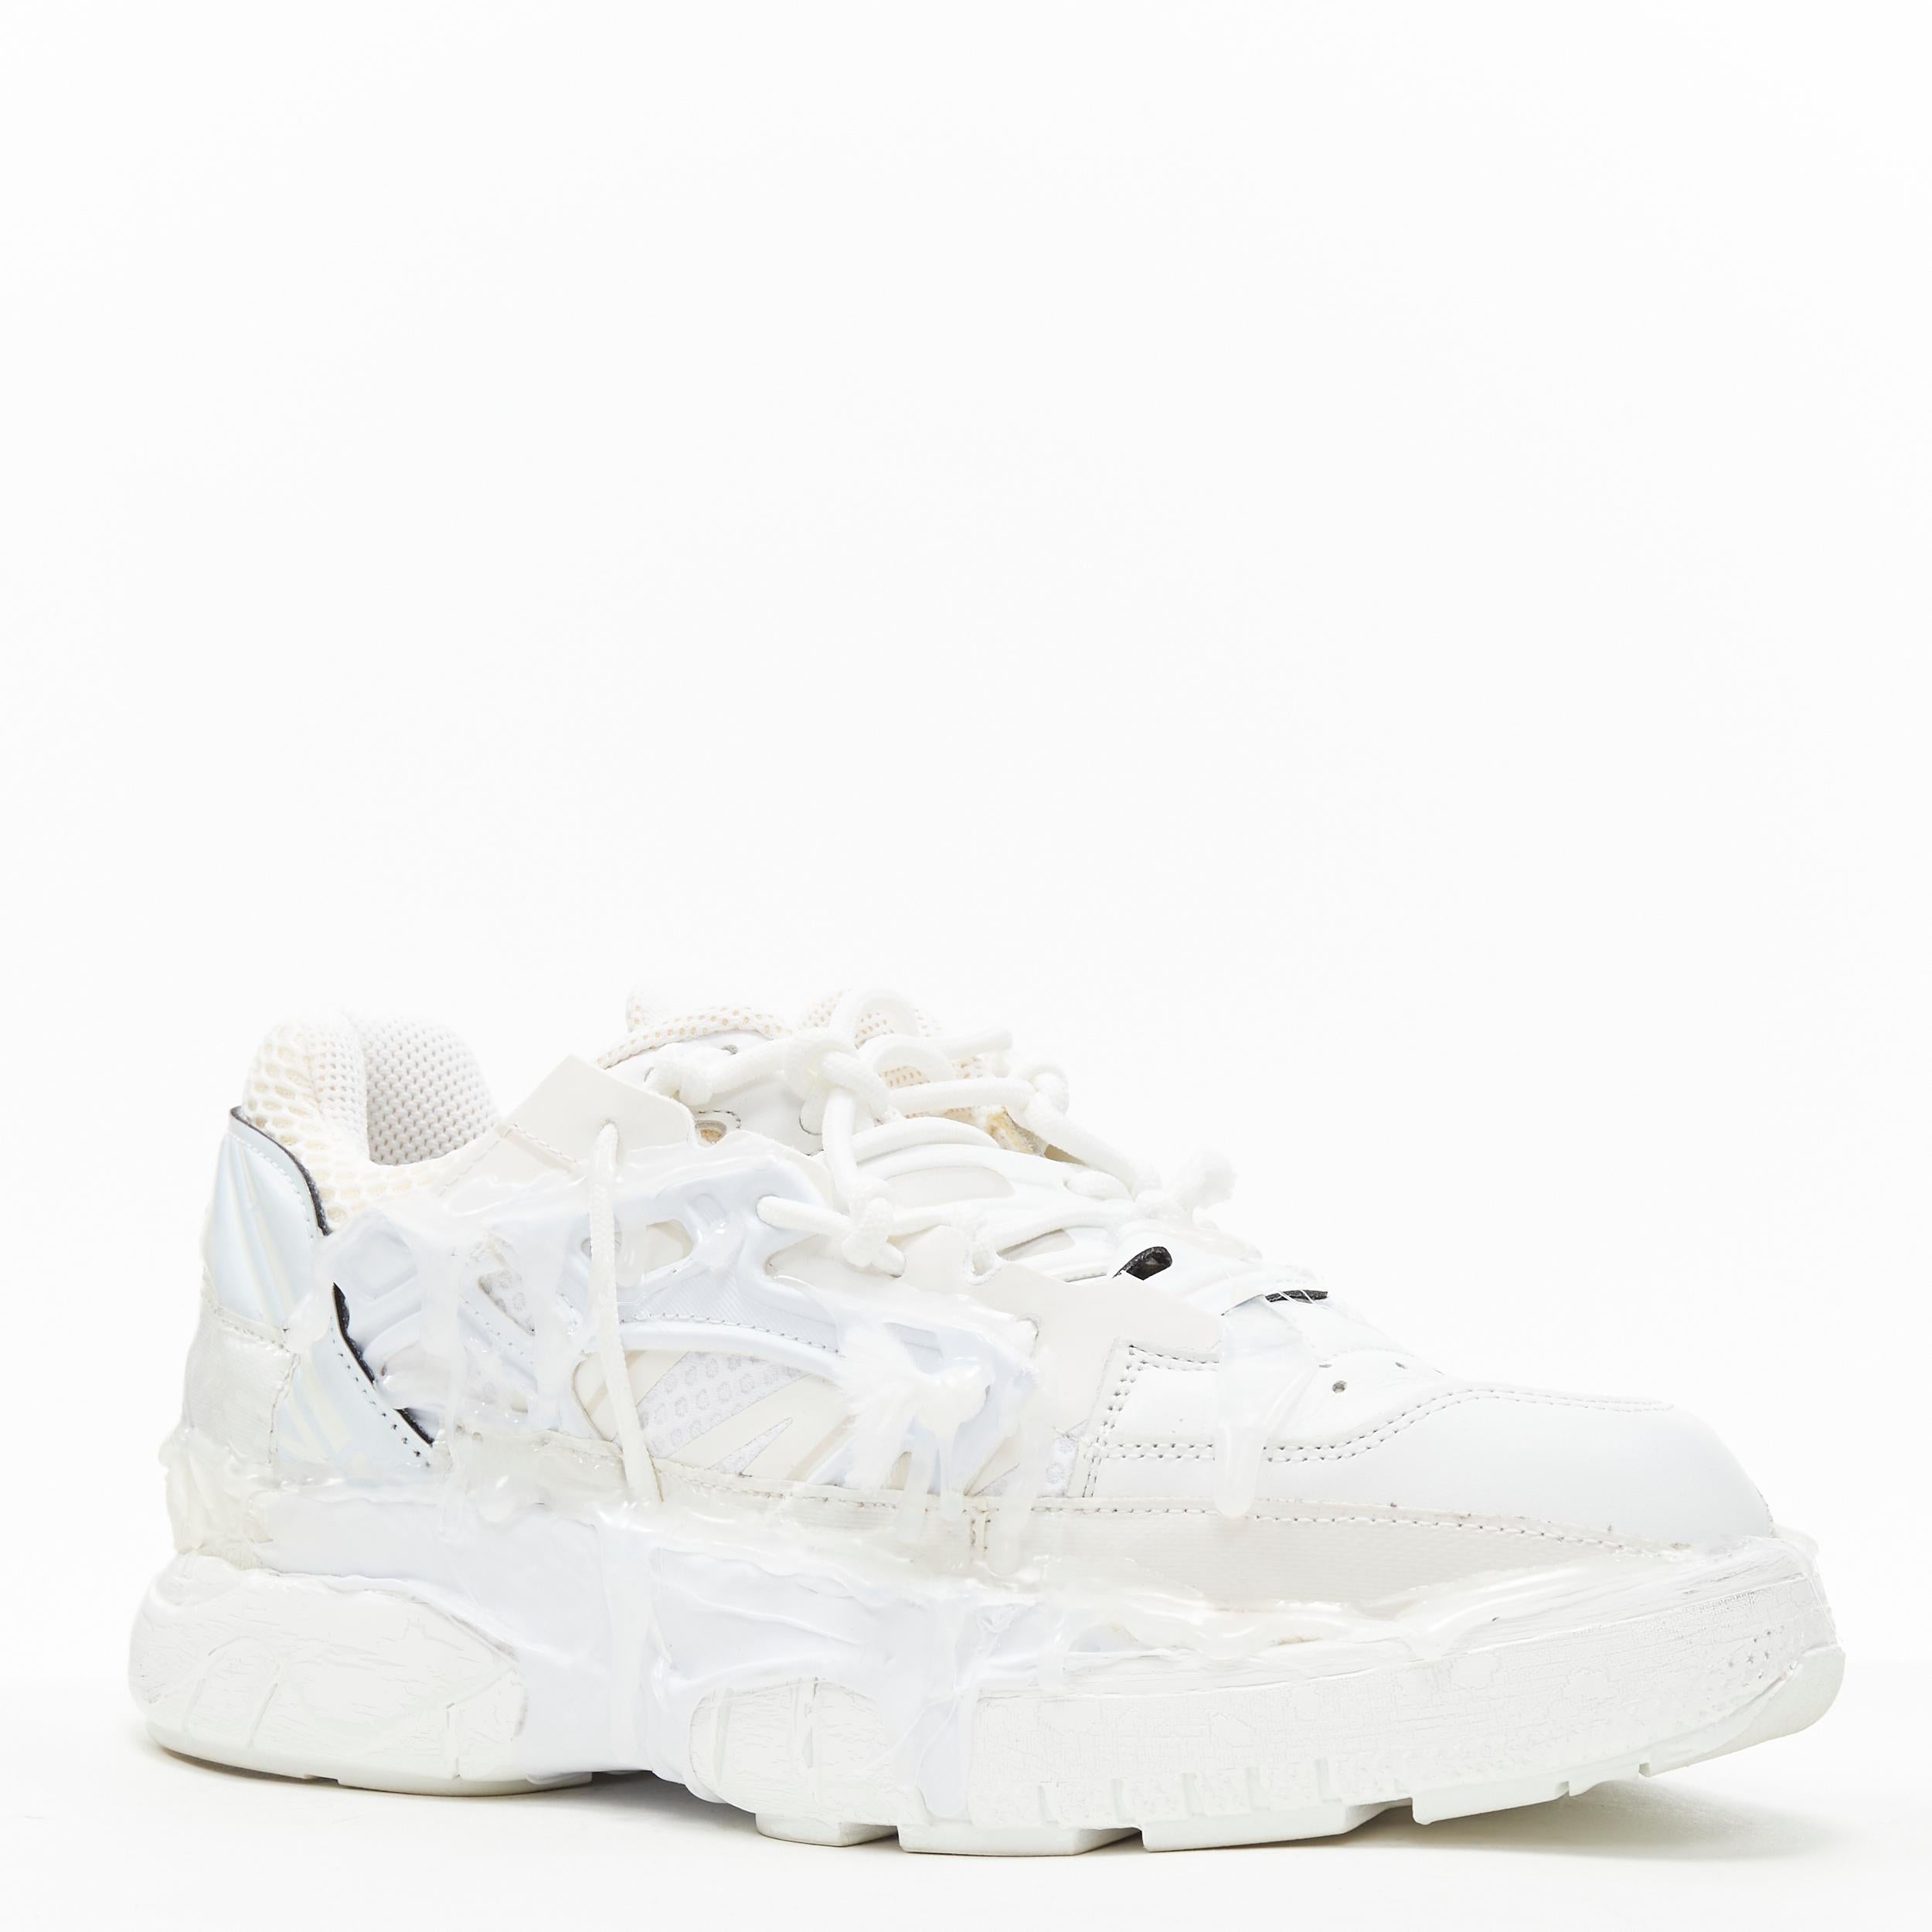 new MAISON MARGIELA Fusion white deconstructed glue covered low top sneaker EU39 
Reference: TGAS/B01196 
Brand: Maison Margiela 
Model: Fusion Sneaker Triple White 
Material: Fabric 
Color: White 
Pattern: Solid 
Closure: Lace Up 
Extra Detail: